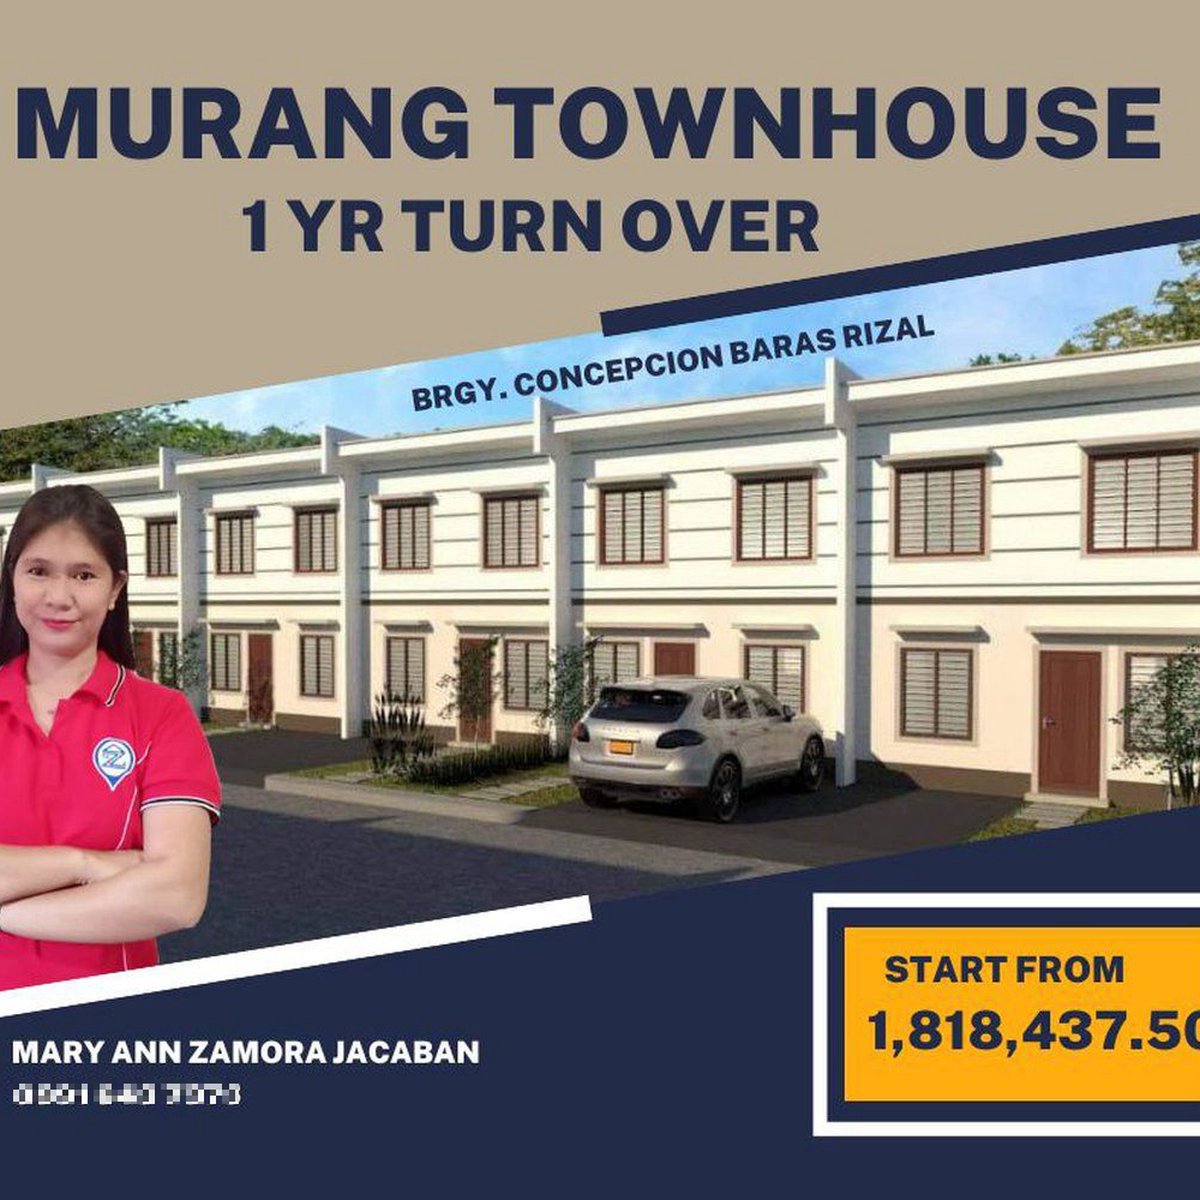 2-Bedroom Townhouse For Sale in Baras Rizal